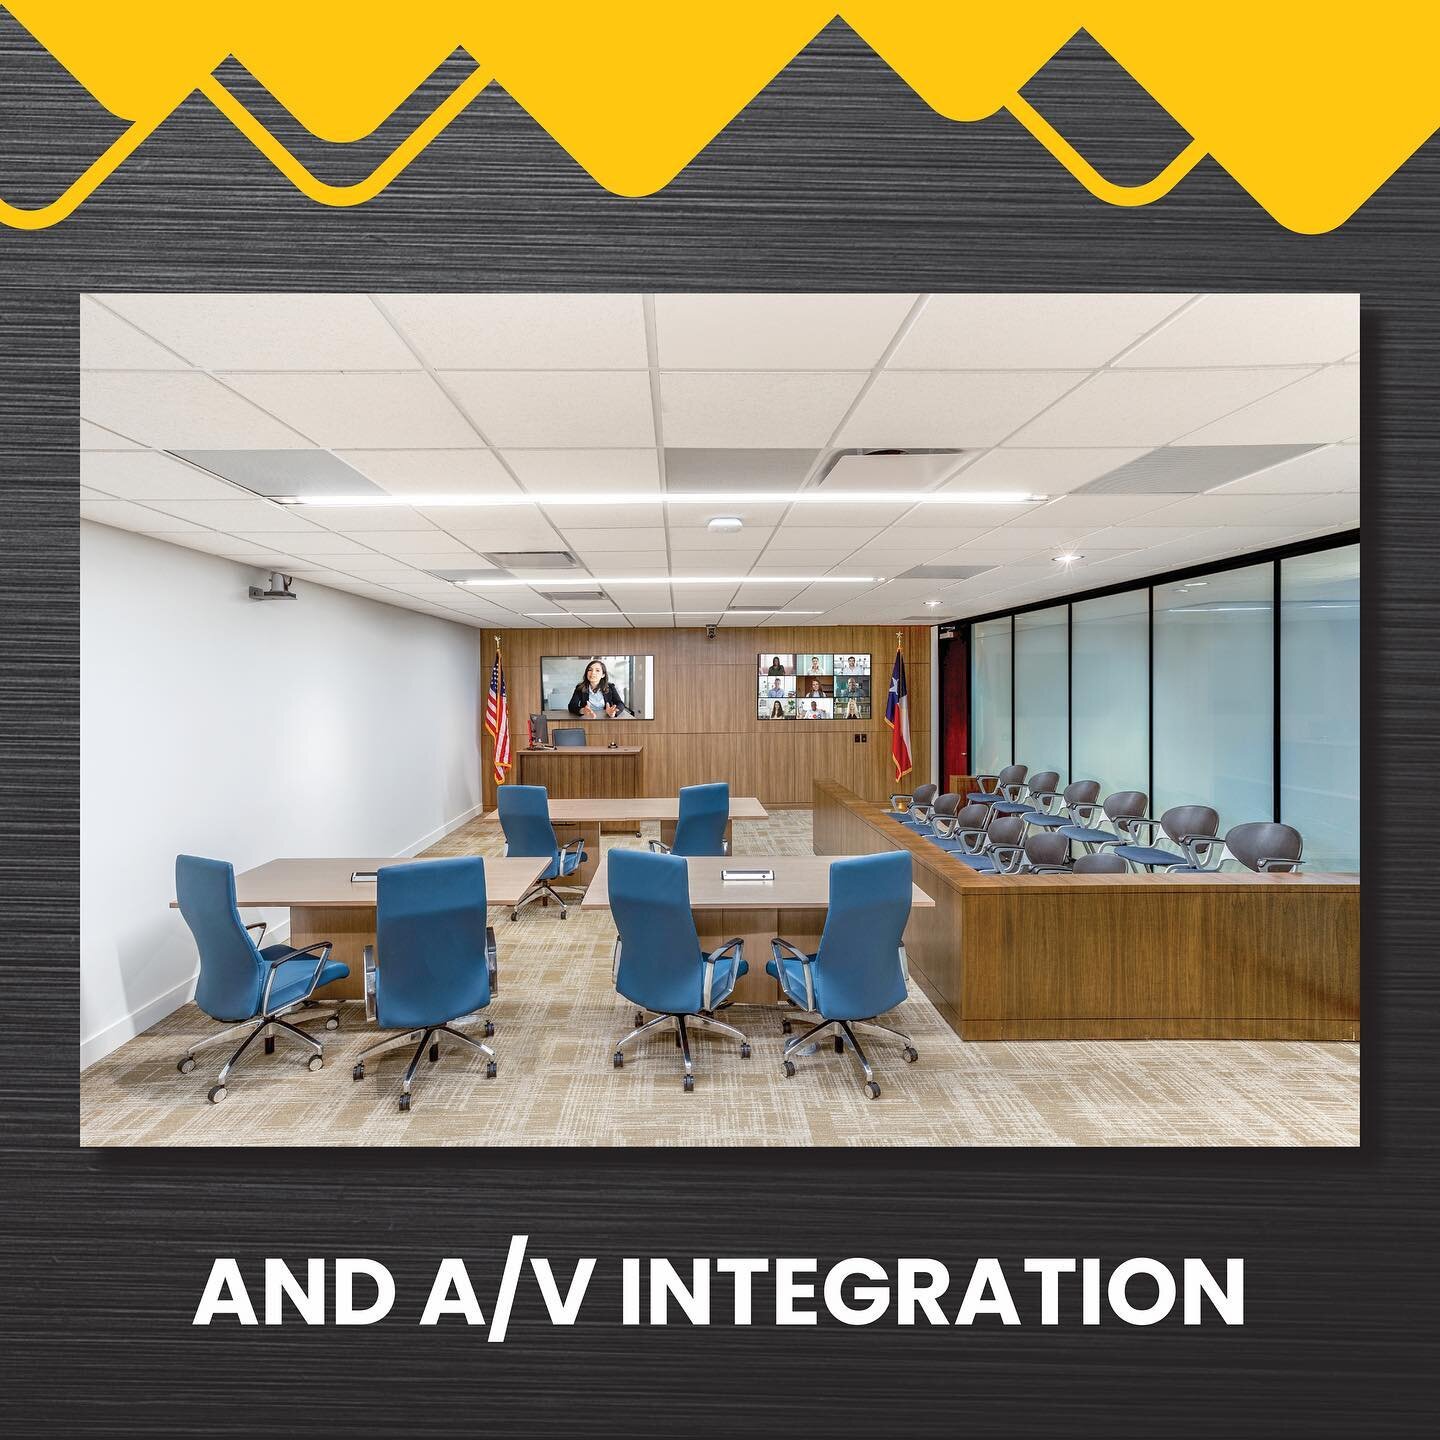 CORE Office Interiors is more than great furniture! We have an amazing team and process but also provide full turn-key solutions for any interiors project. We are proud to showcase one such project lead by our A/V Integration team, John Trump, and ou